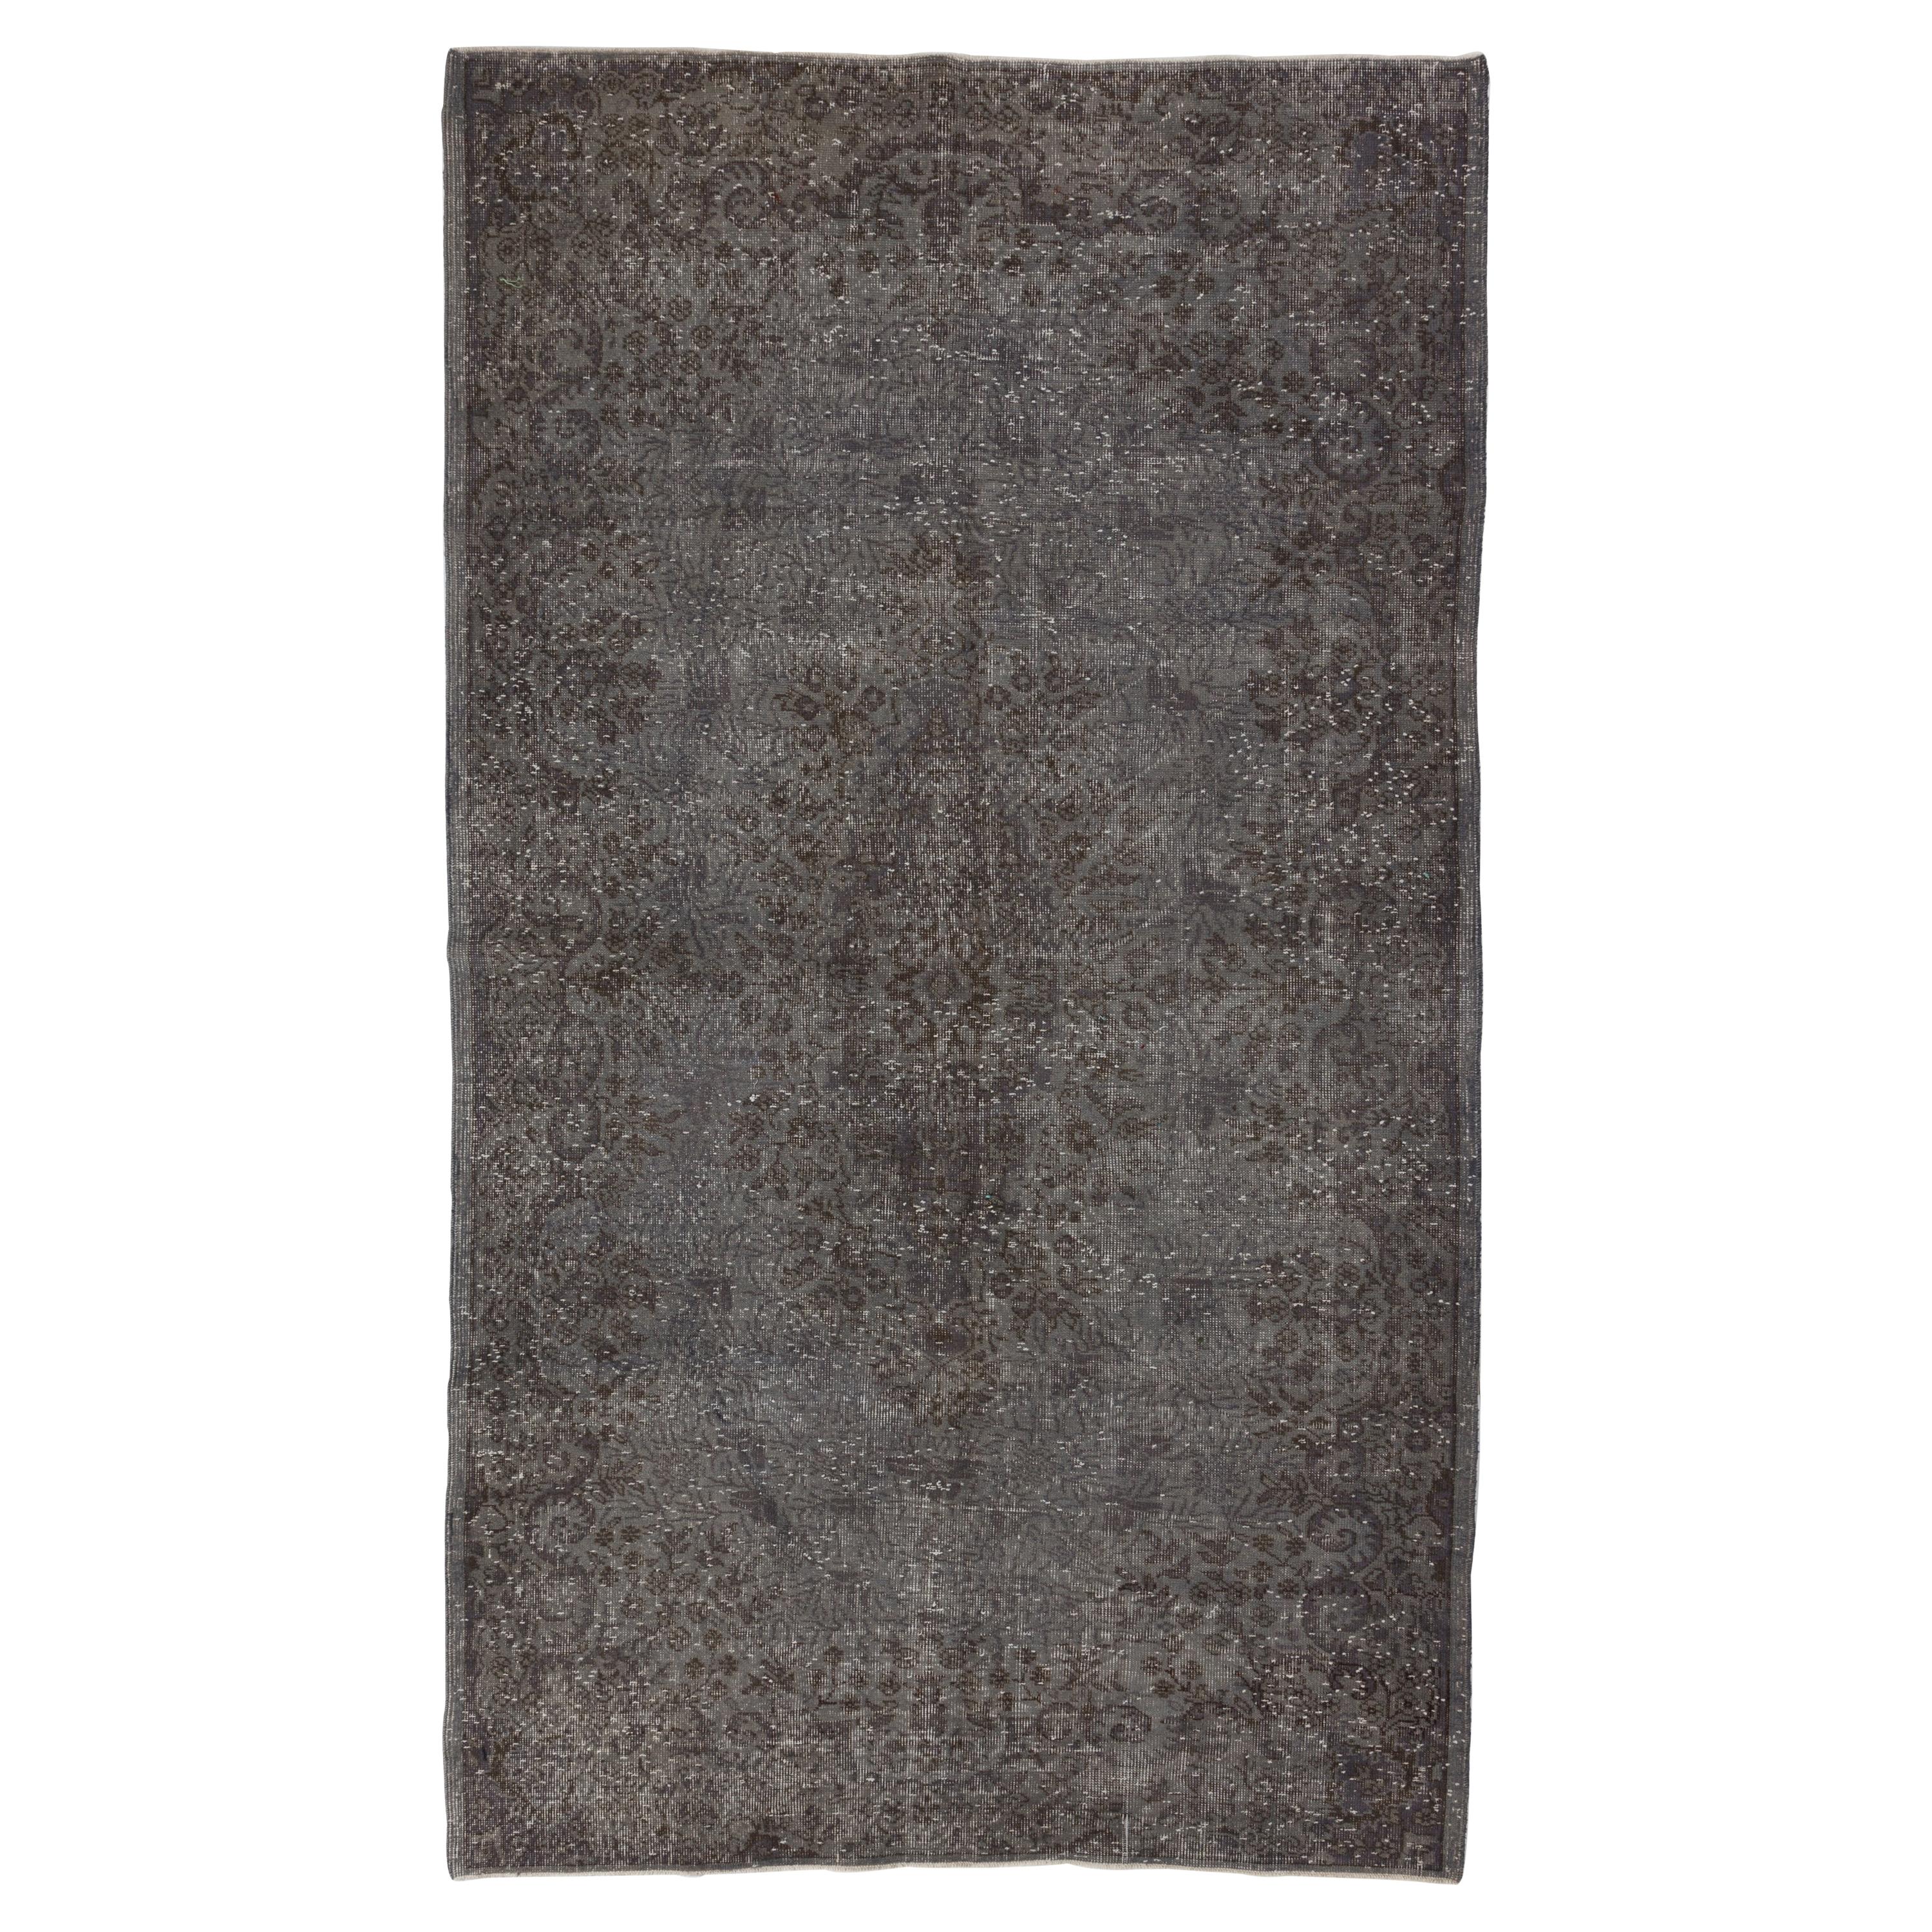 5.4x10 Ft Vintage Handmade Rug Over-Dyed in Gray Color, Great 4 Modern Interiors For Sale